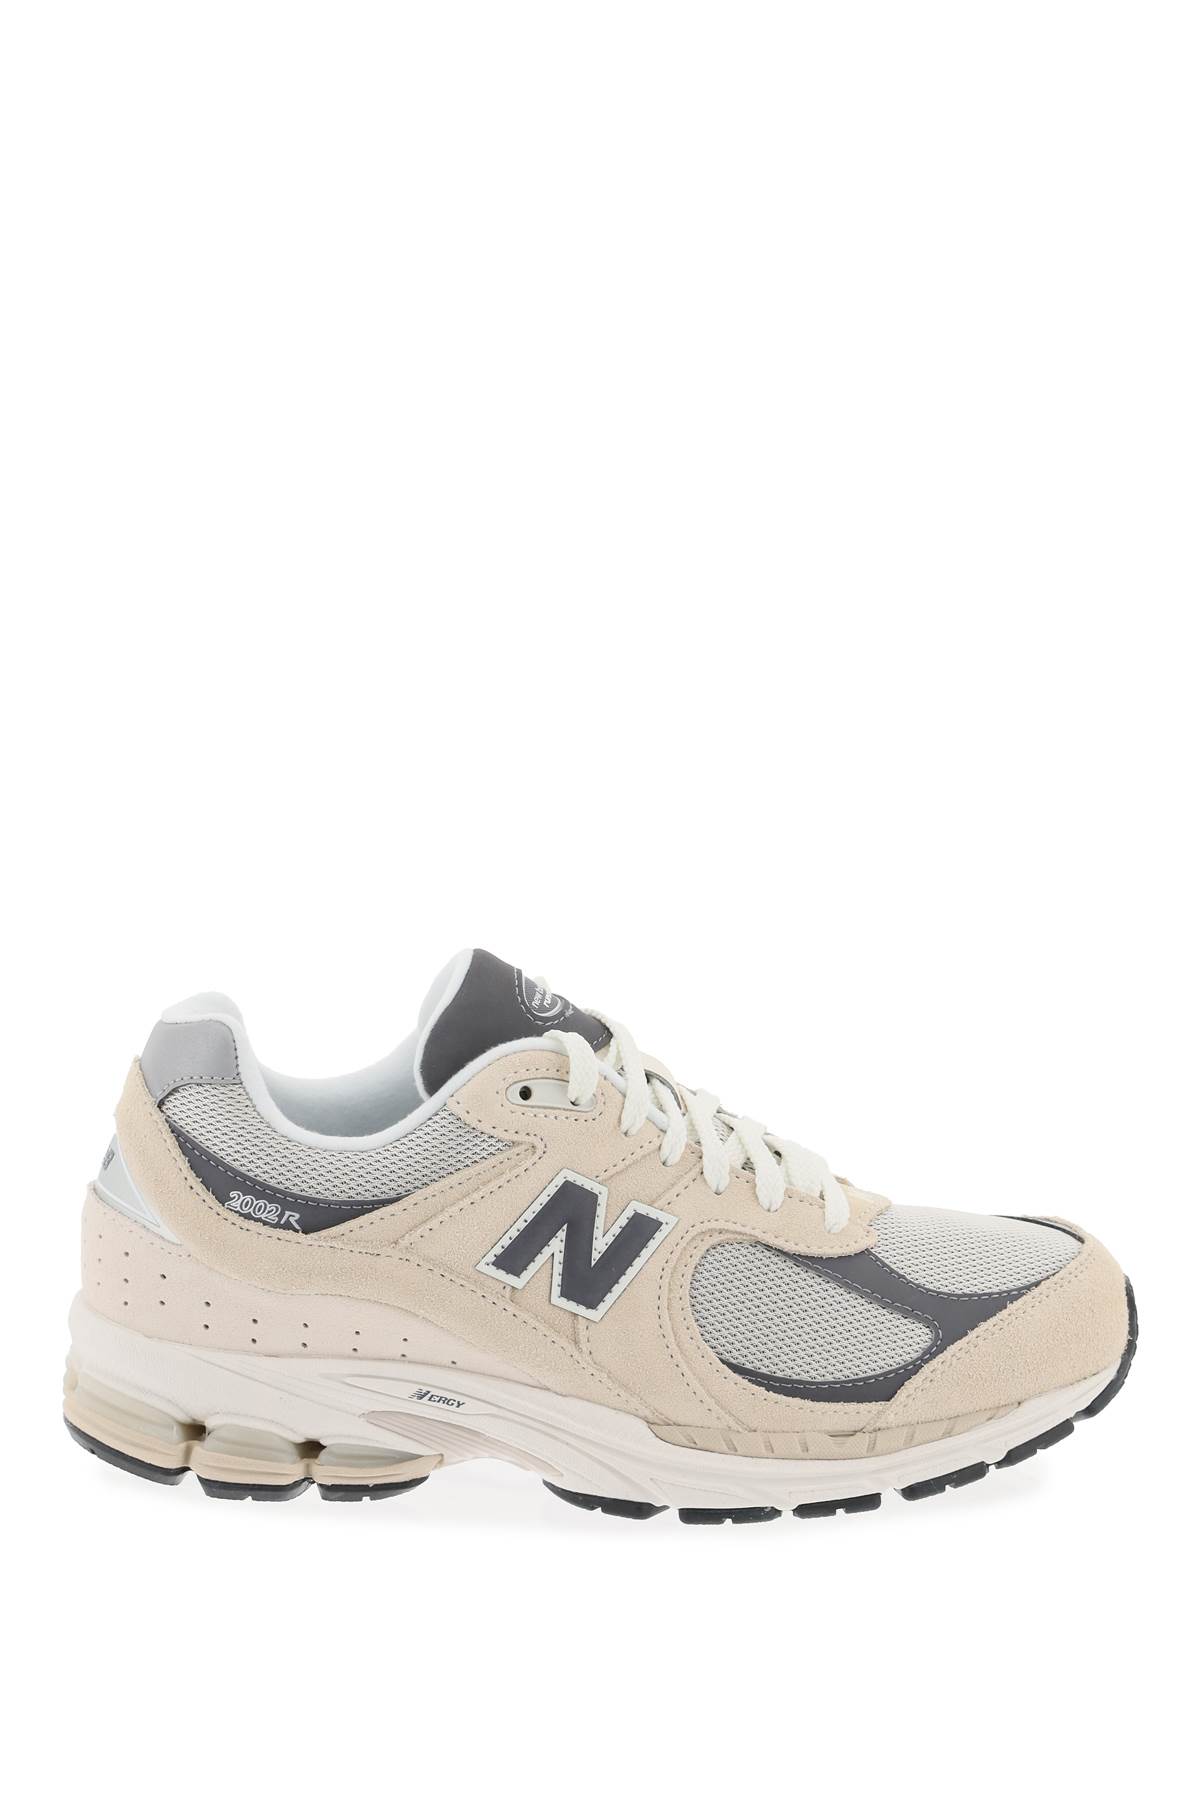 Shop New Balance 2002r Sneakers In Sandstone (grey)